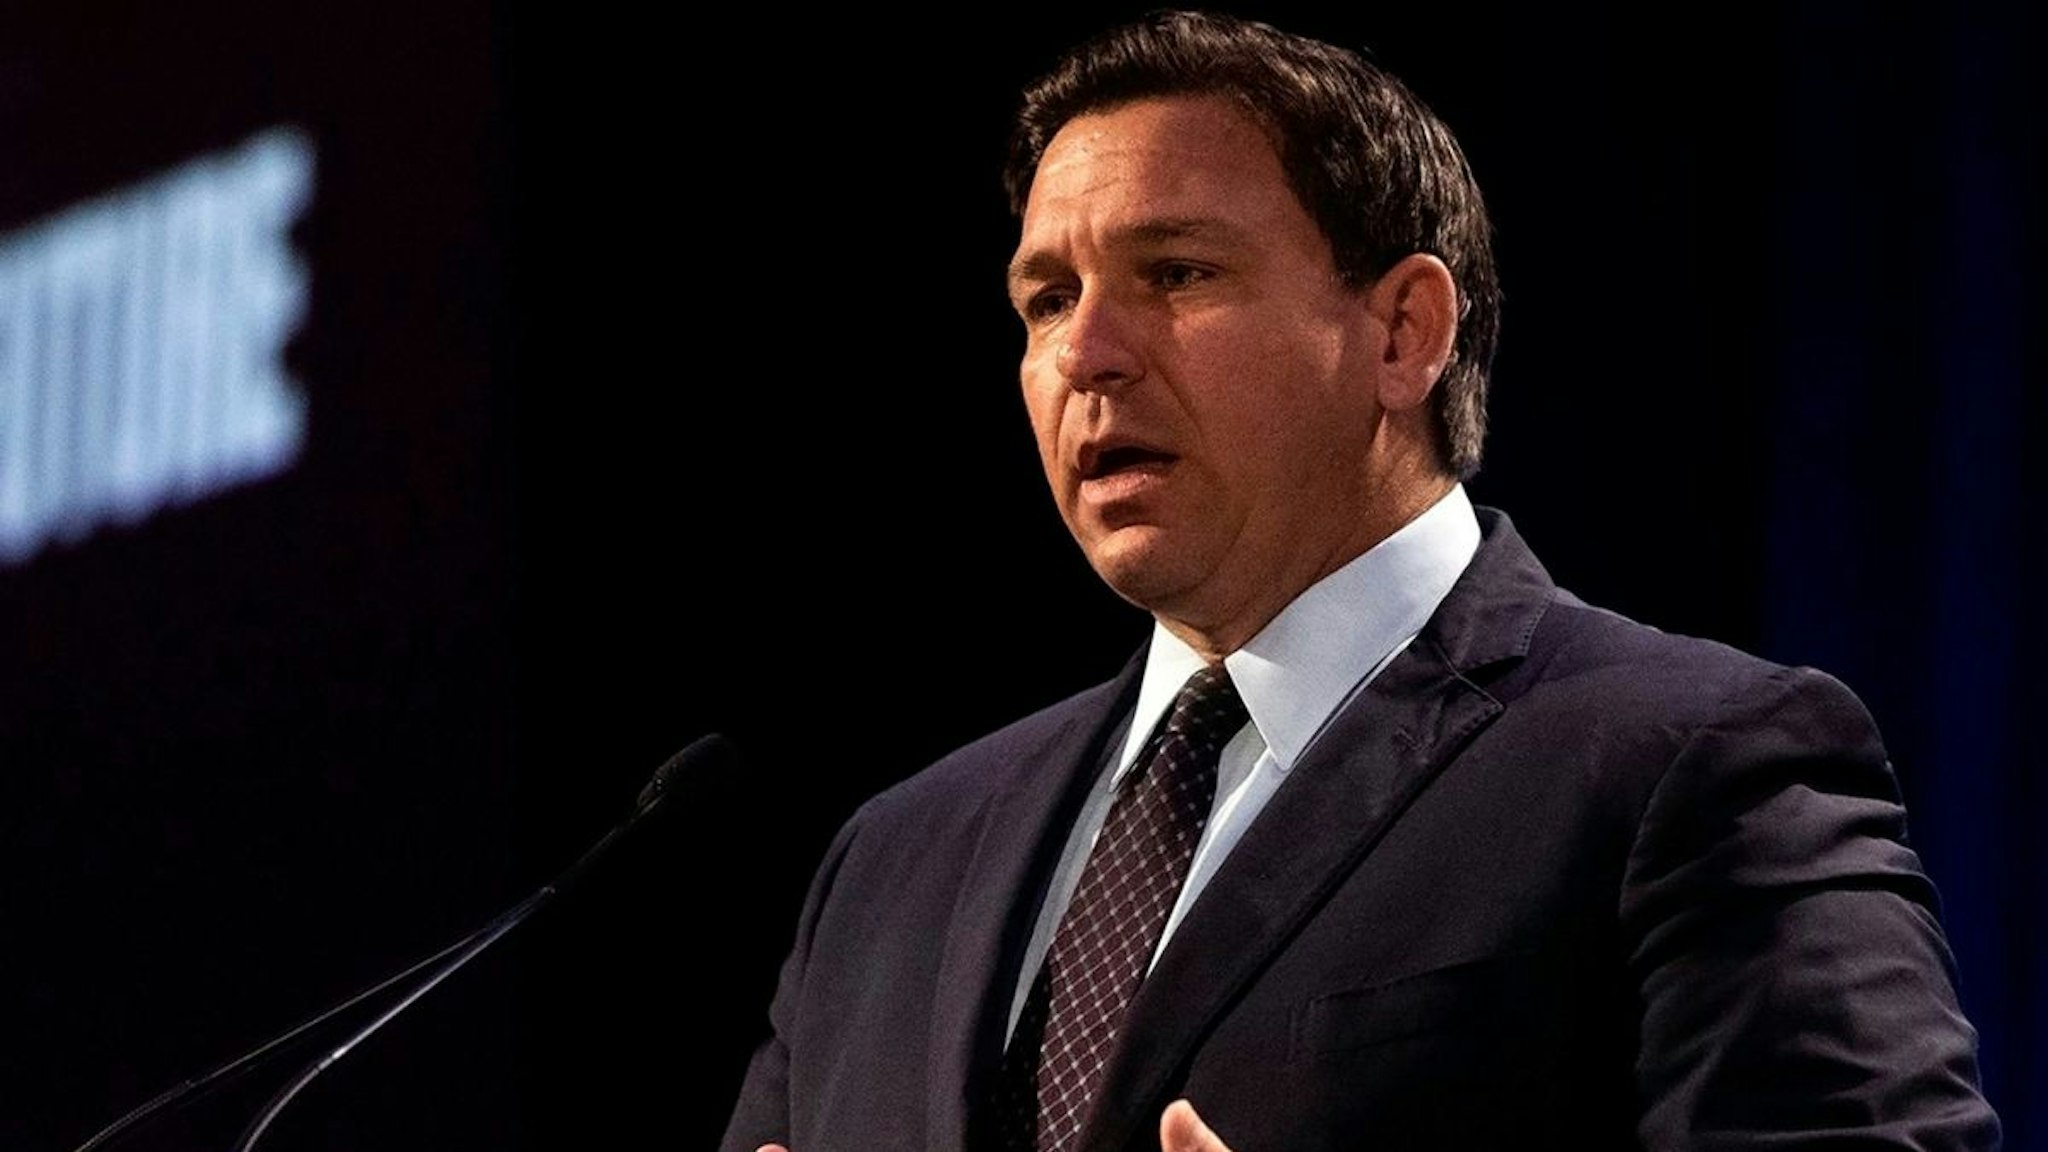 Gov. Ron DeSantis speaks about his goals for Floridaâs future during the 2021 Florida Chamber Annual Meeting and Future of Florida Forum at the Hyatt Regency Grand Cypress on Oct. 28, 2021, in Orlando, Florida.